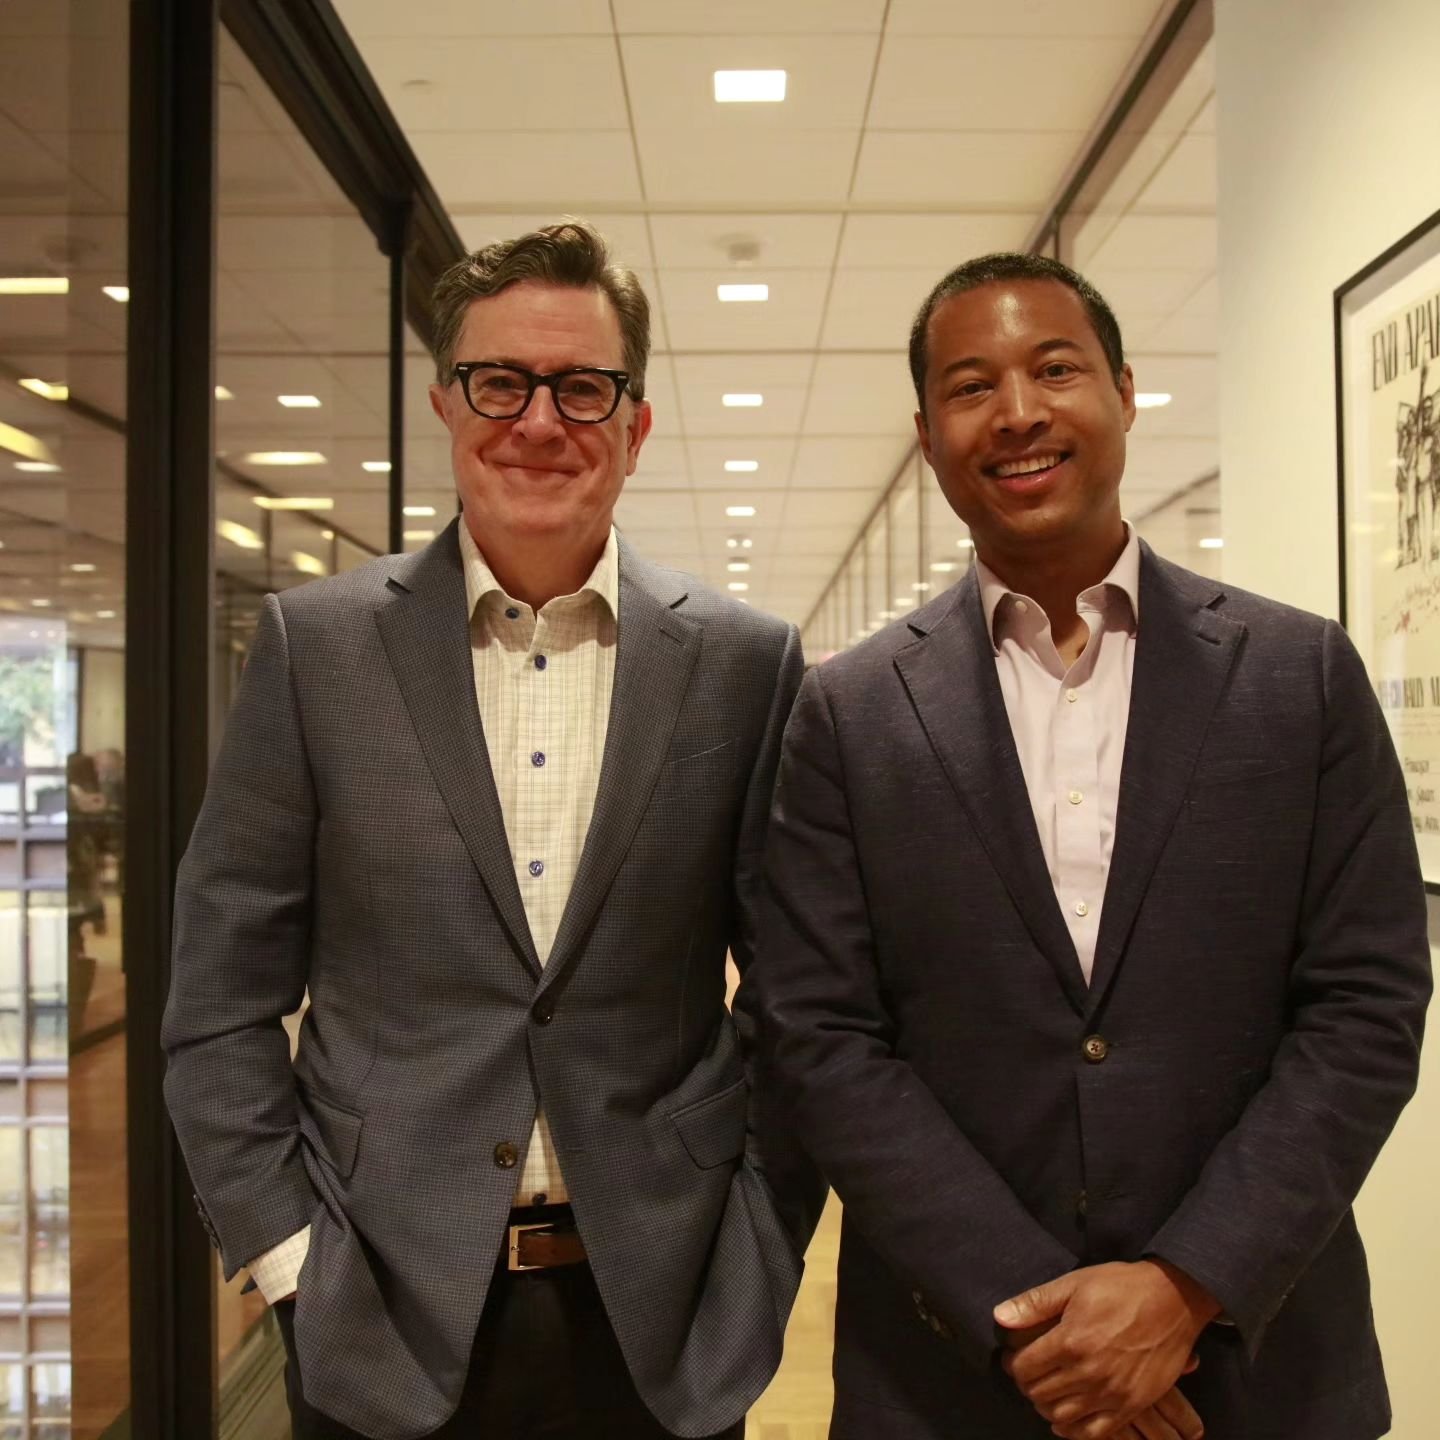 Hello. My name is Stephen he said...

Let me take you back to three weeks ago today, where LaJoy had the honor of being the creative partner for two DonorsChoose events and Stephen Colbert who is an active member of their board. 

Here are some facts